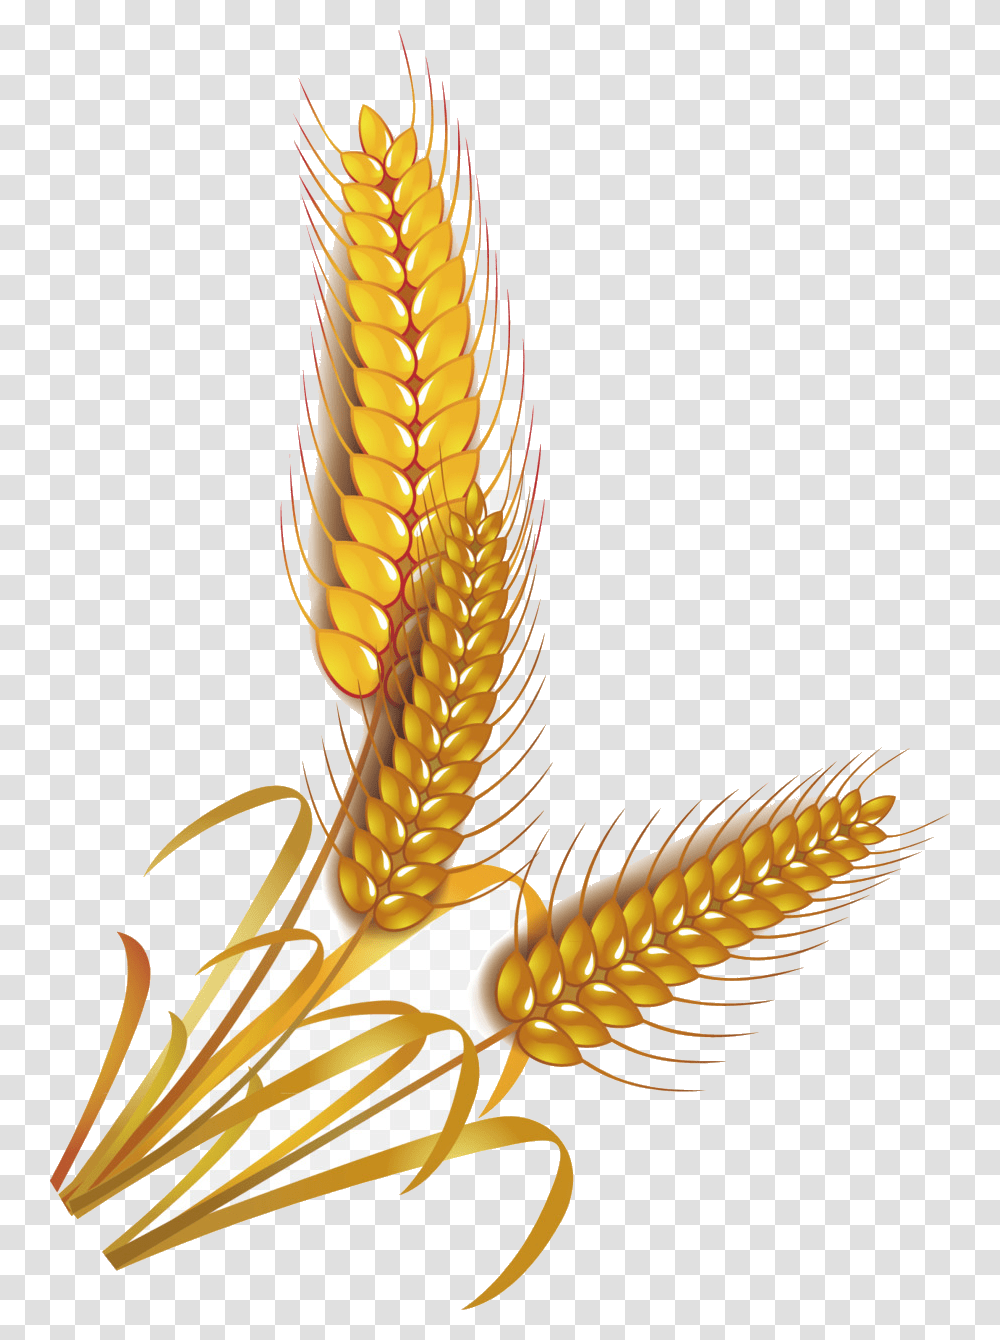 Wheat Vector At Free For Personal Use Whole Grain Clip Art, Plant, Vegetable, Food, Corn Transparent Png